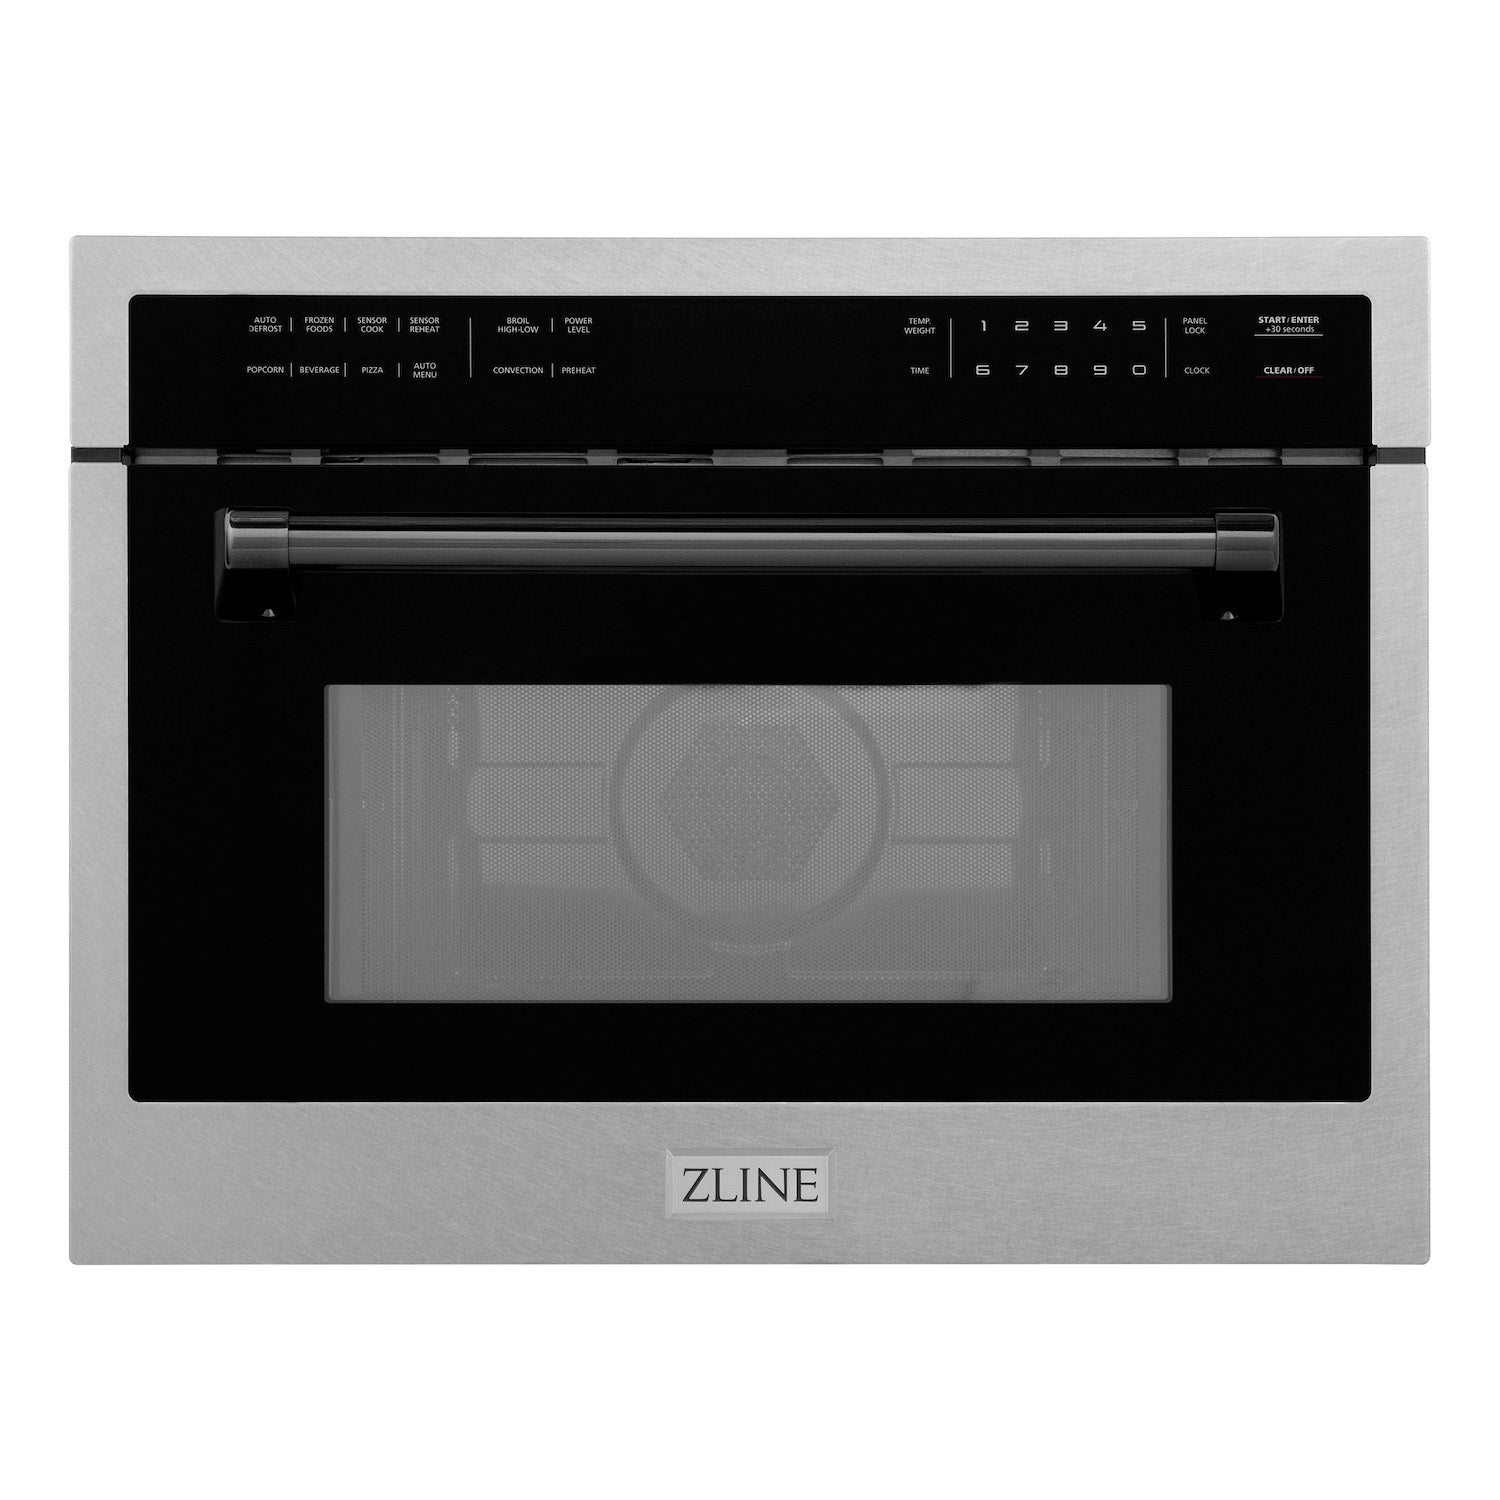 ZLINE Autograph Edition 24" 1.6 cu ft. Built-in Convection Microwave Oven in Fingerprint Resistant Stainless Steel with Matte Black Accents (MWOZ-24-SS-MB)